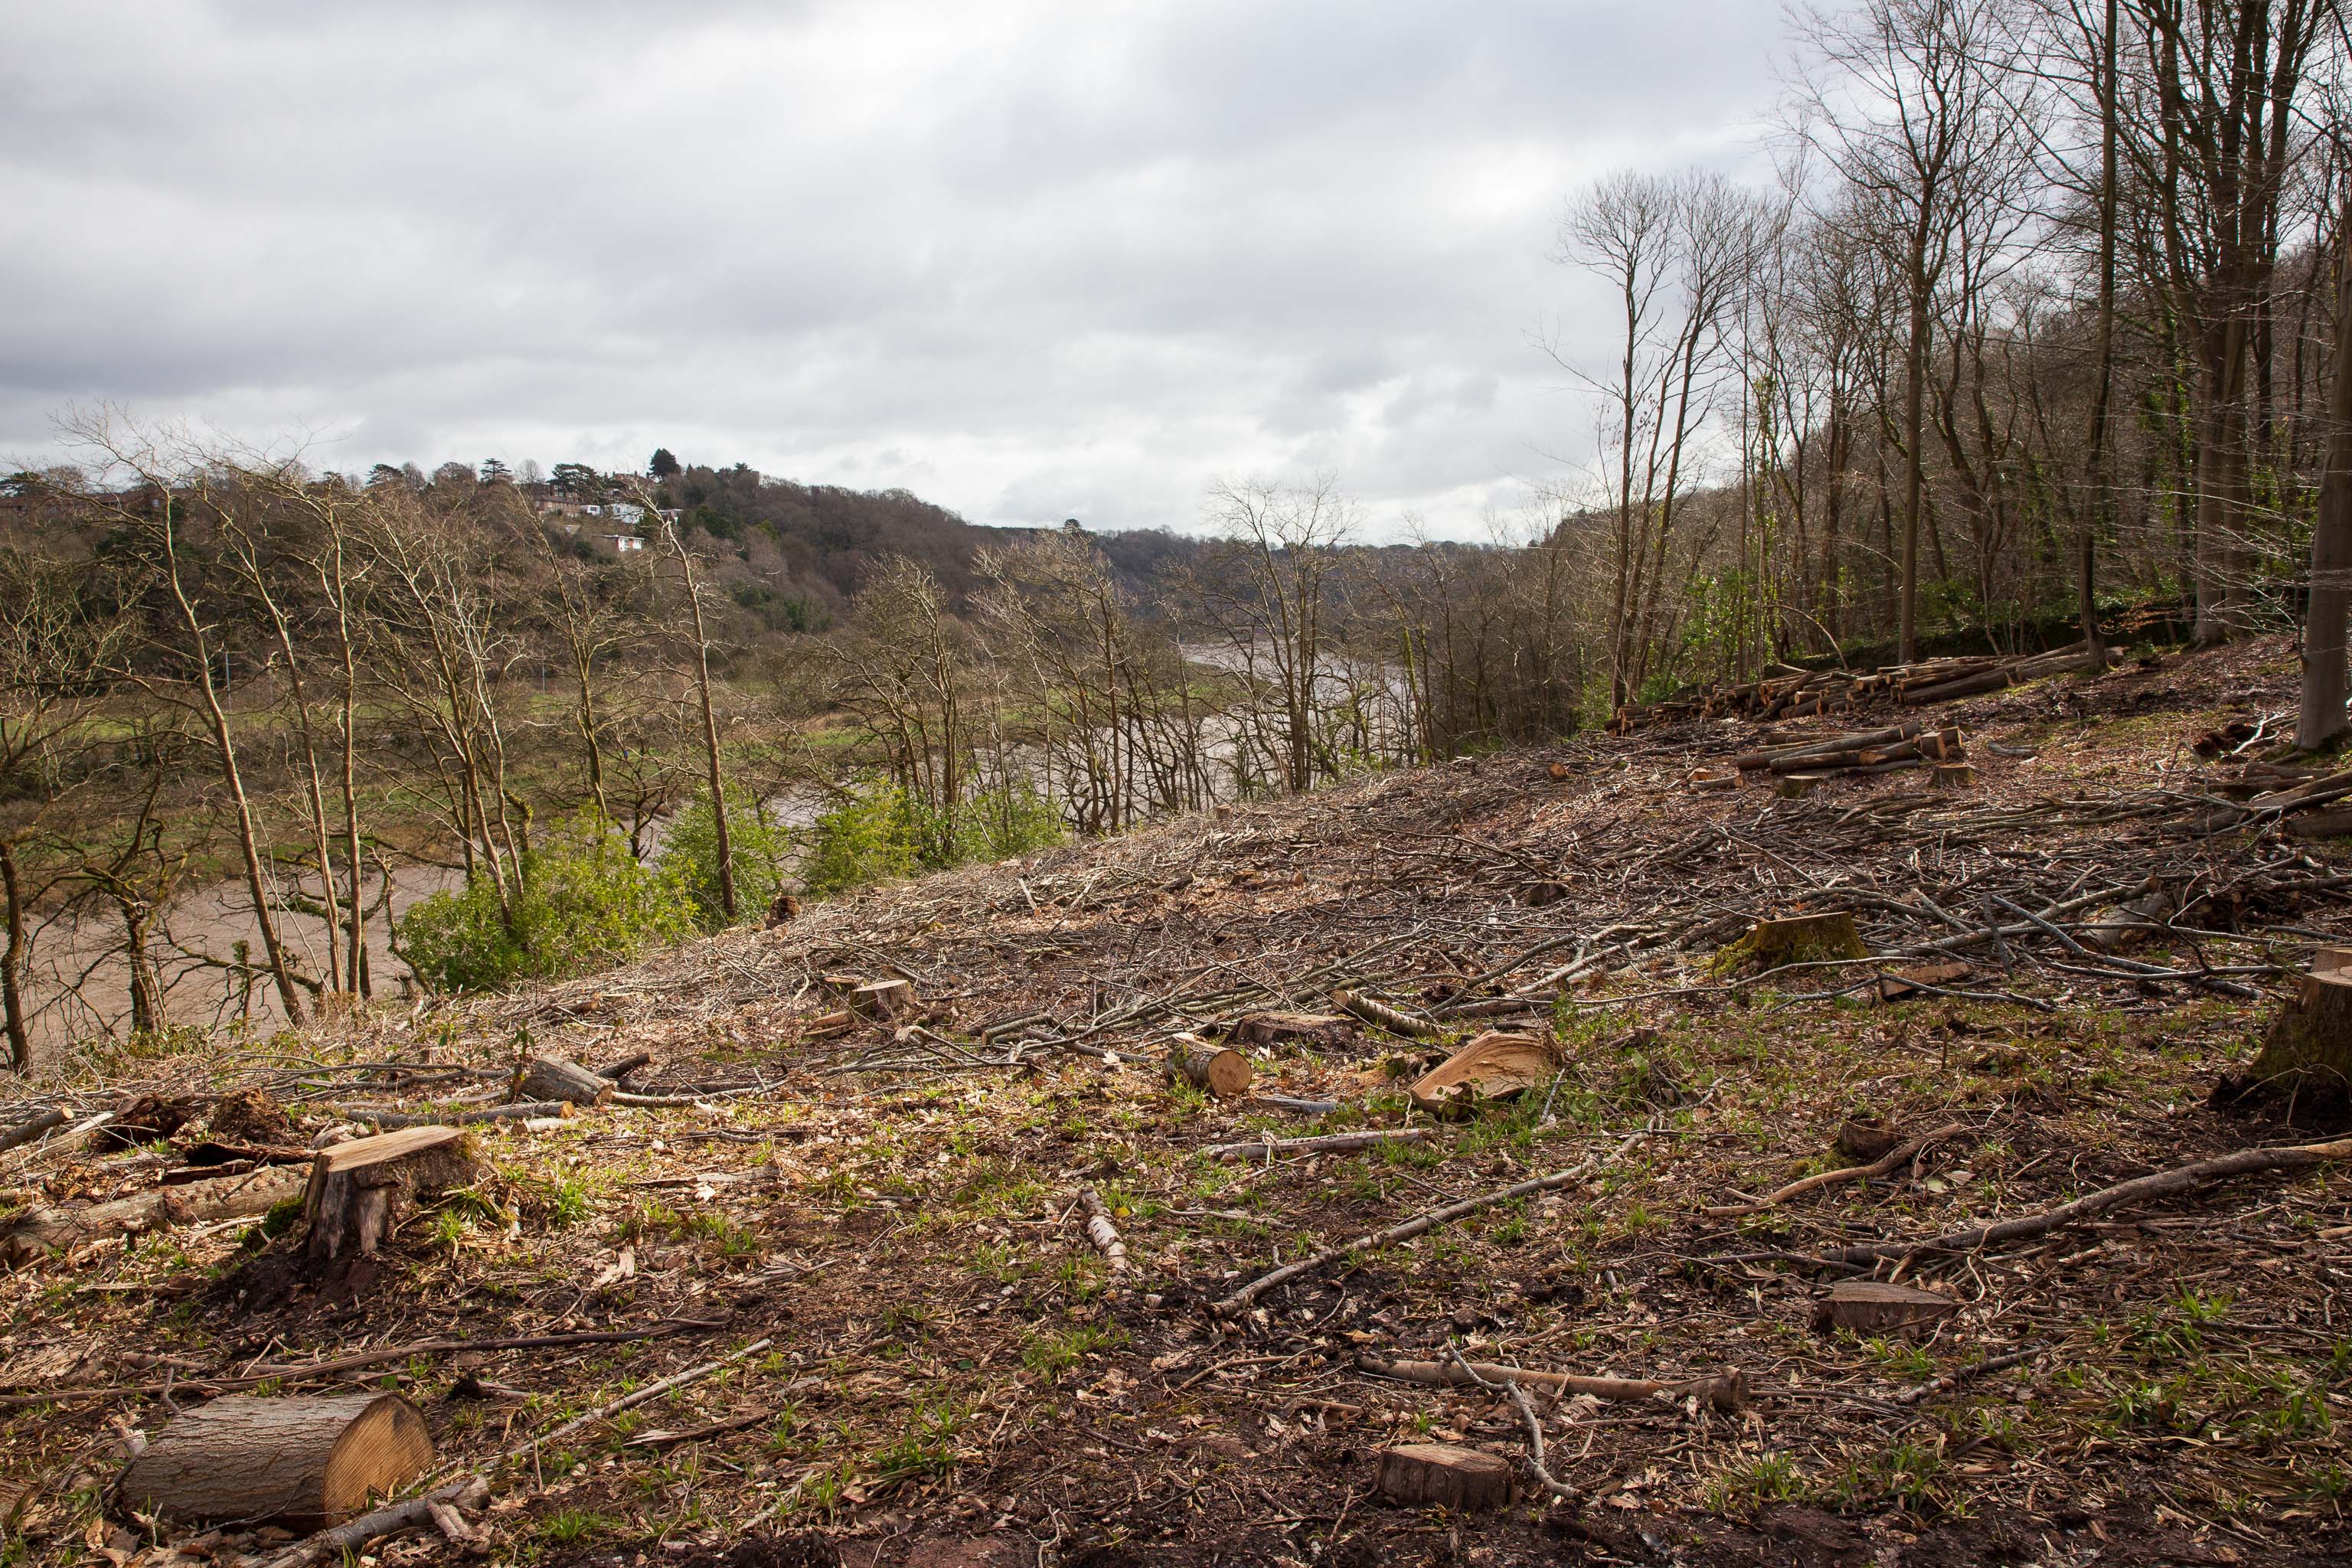 Clearance
I think this may be some of the non-native tree clearance mentioned in this Bristol Post article from September 2020.


  Stephen Eyres, head of fo...